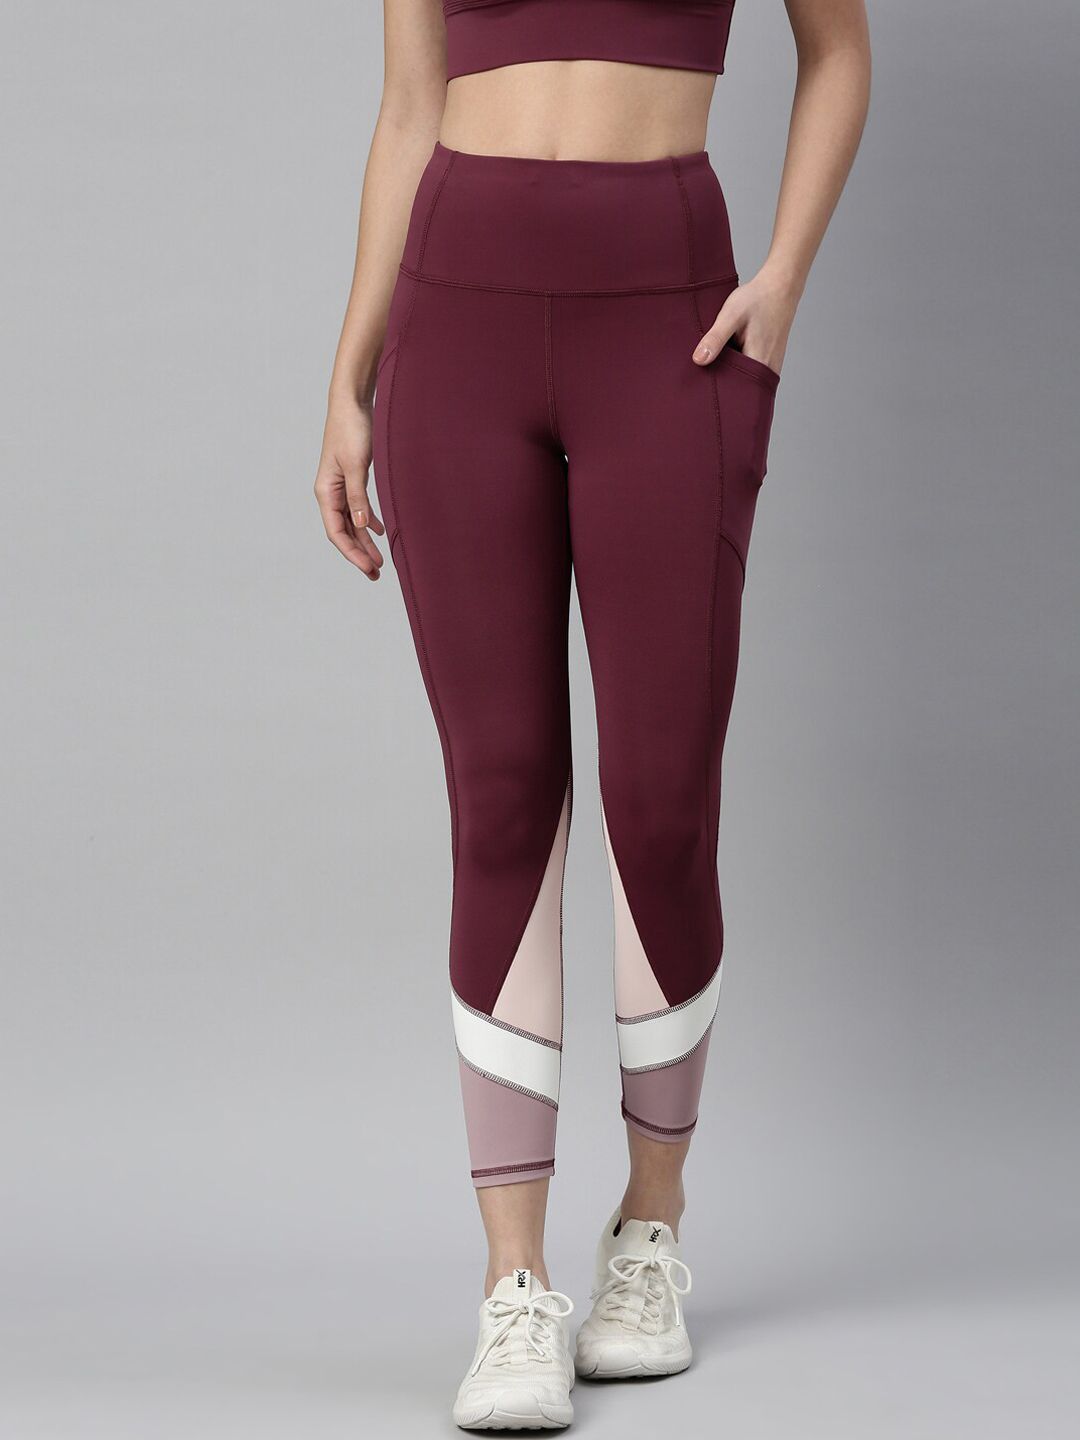 Enamor Women Maroon Dry Fit Antimicrobial High Rise Tights Price in India